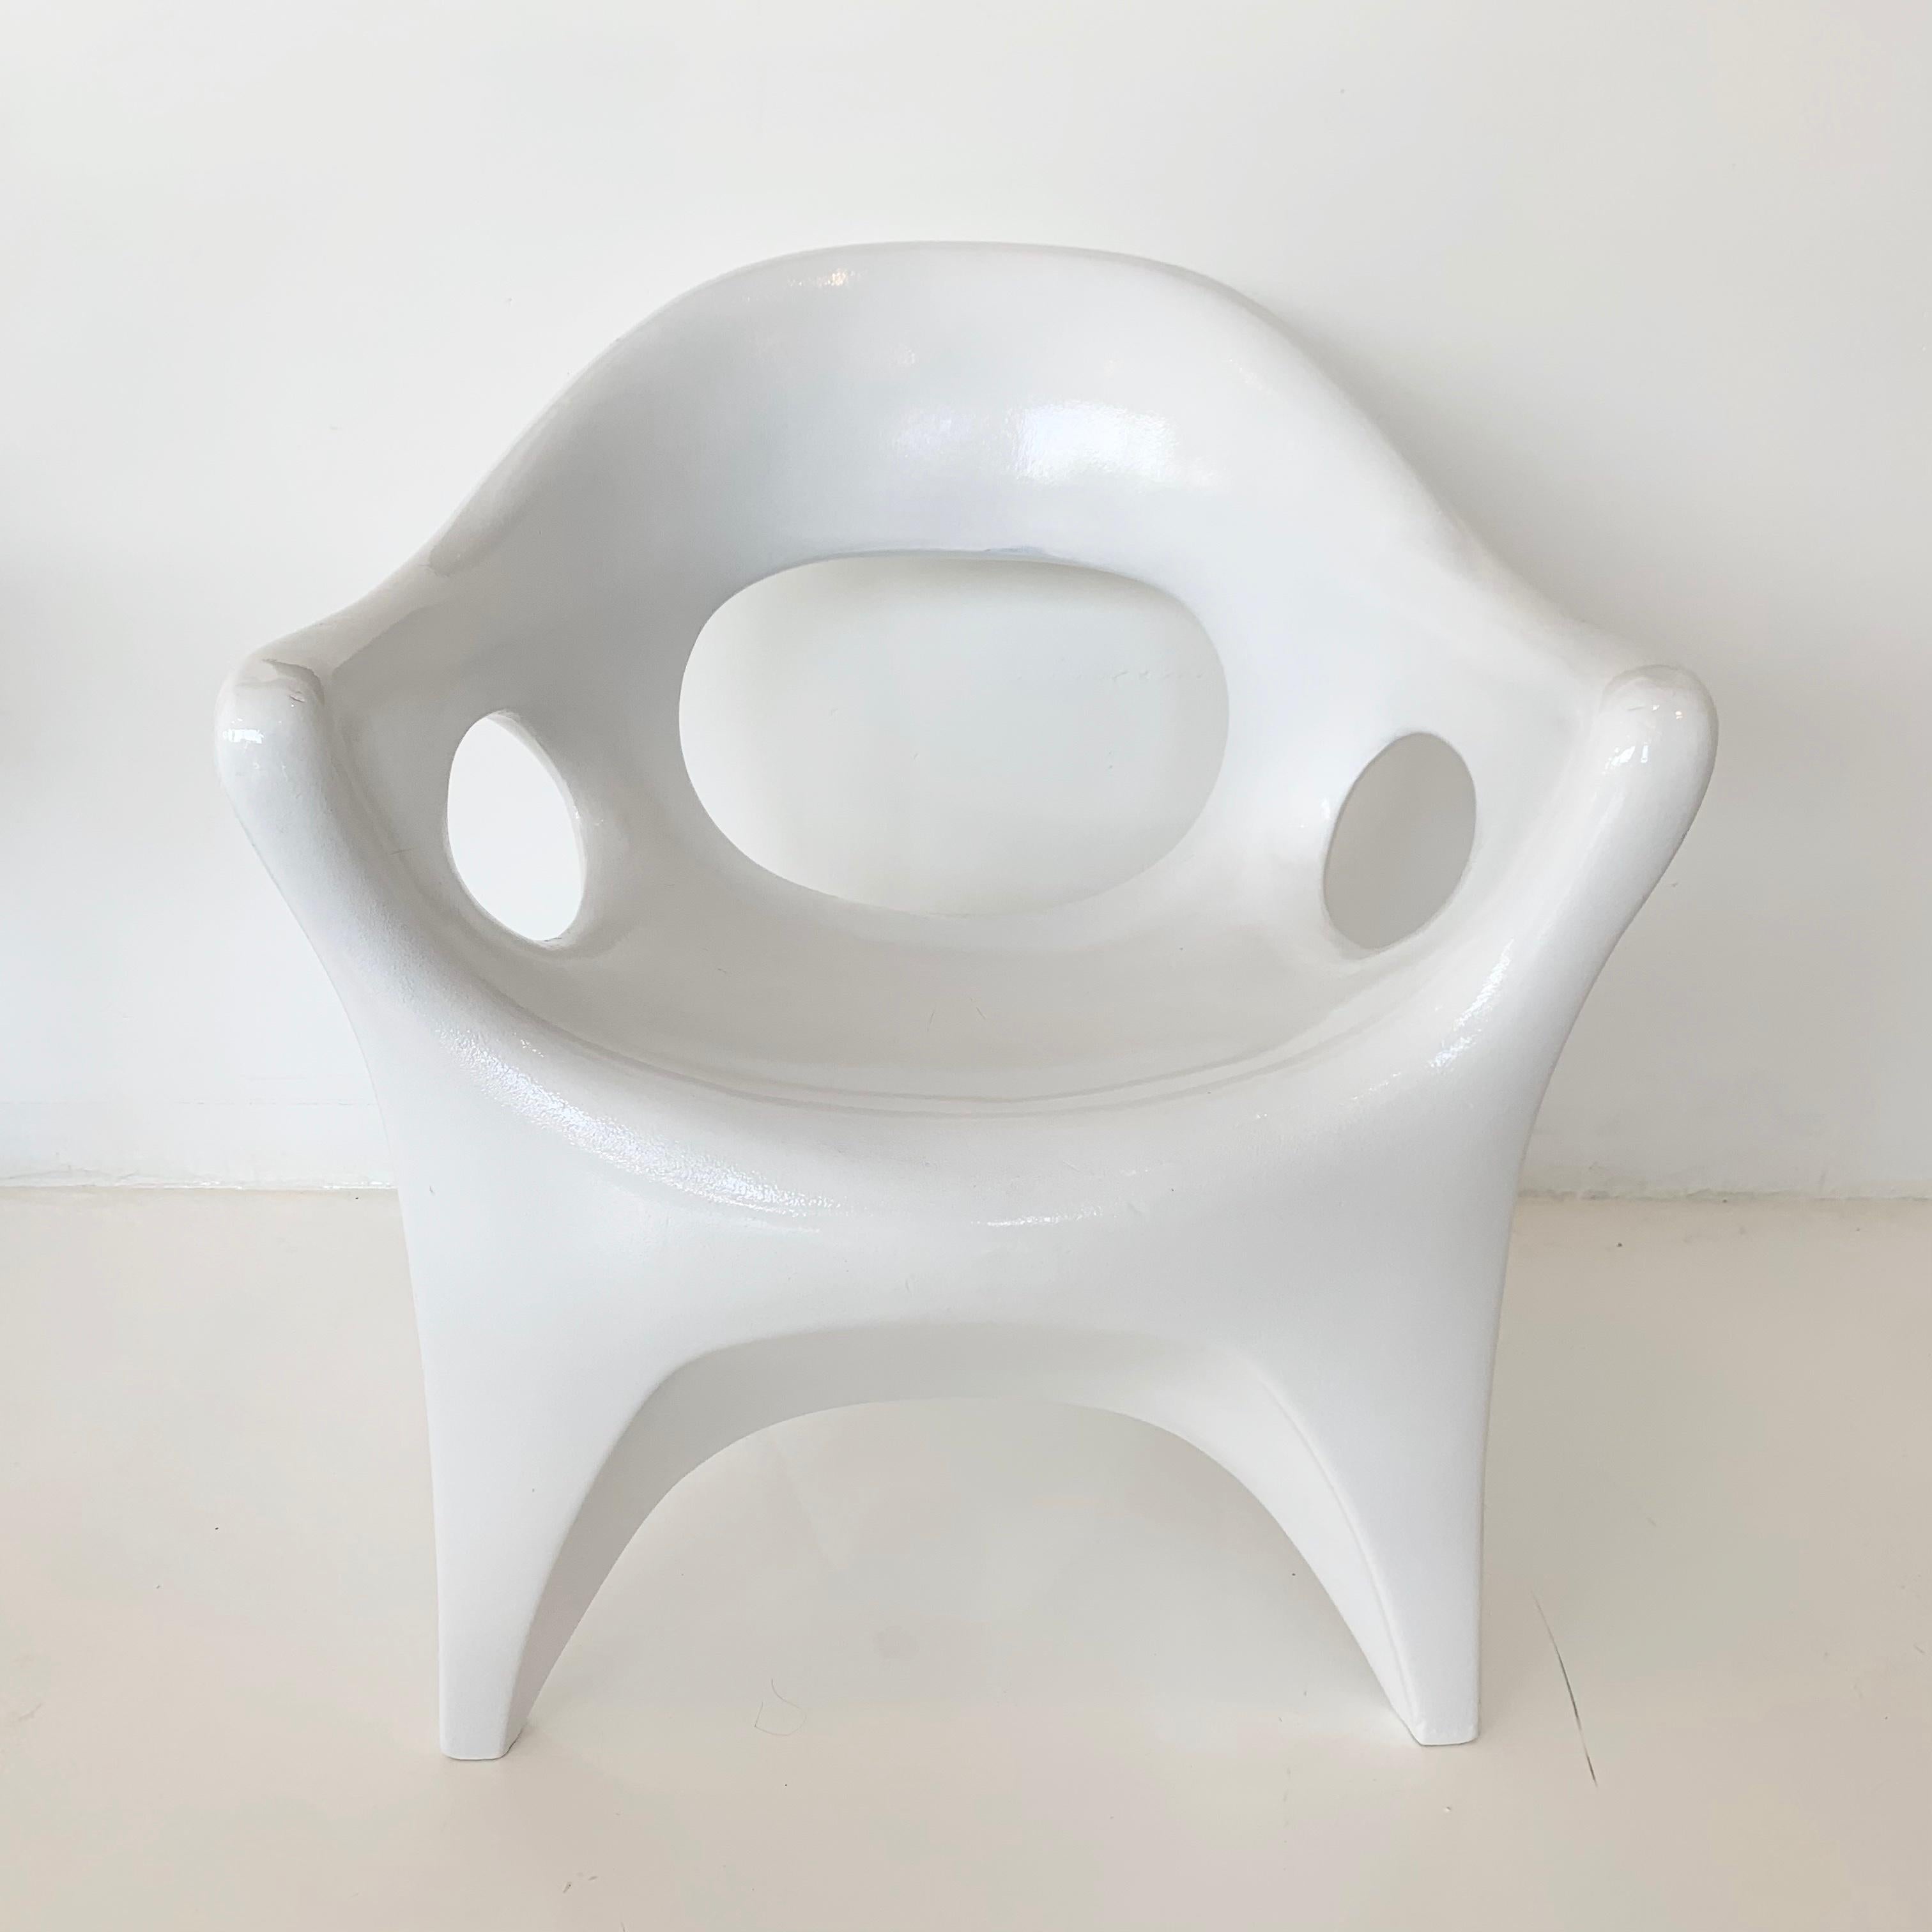 Set of 4 Sculptural Plastic Chairs by John Gale, 1963 For Sale 7